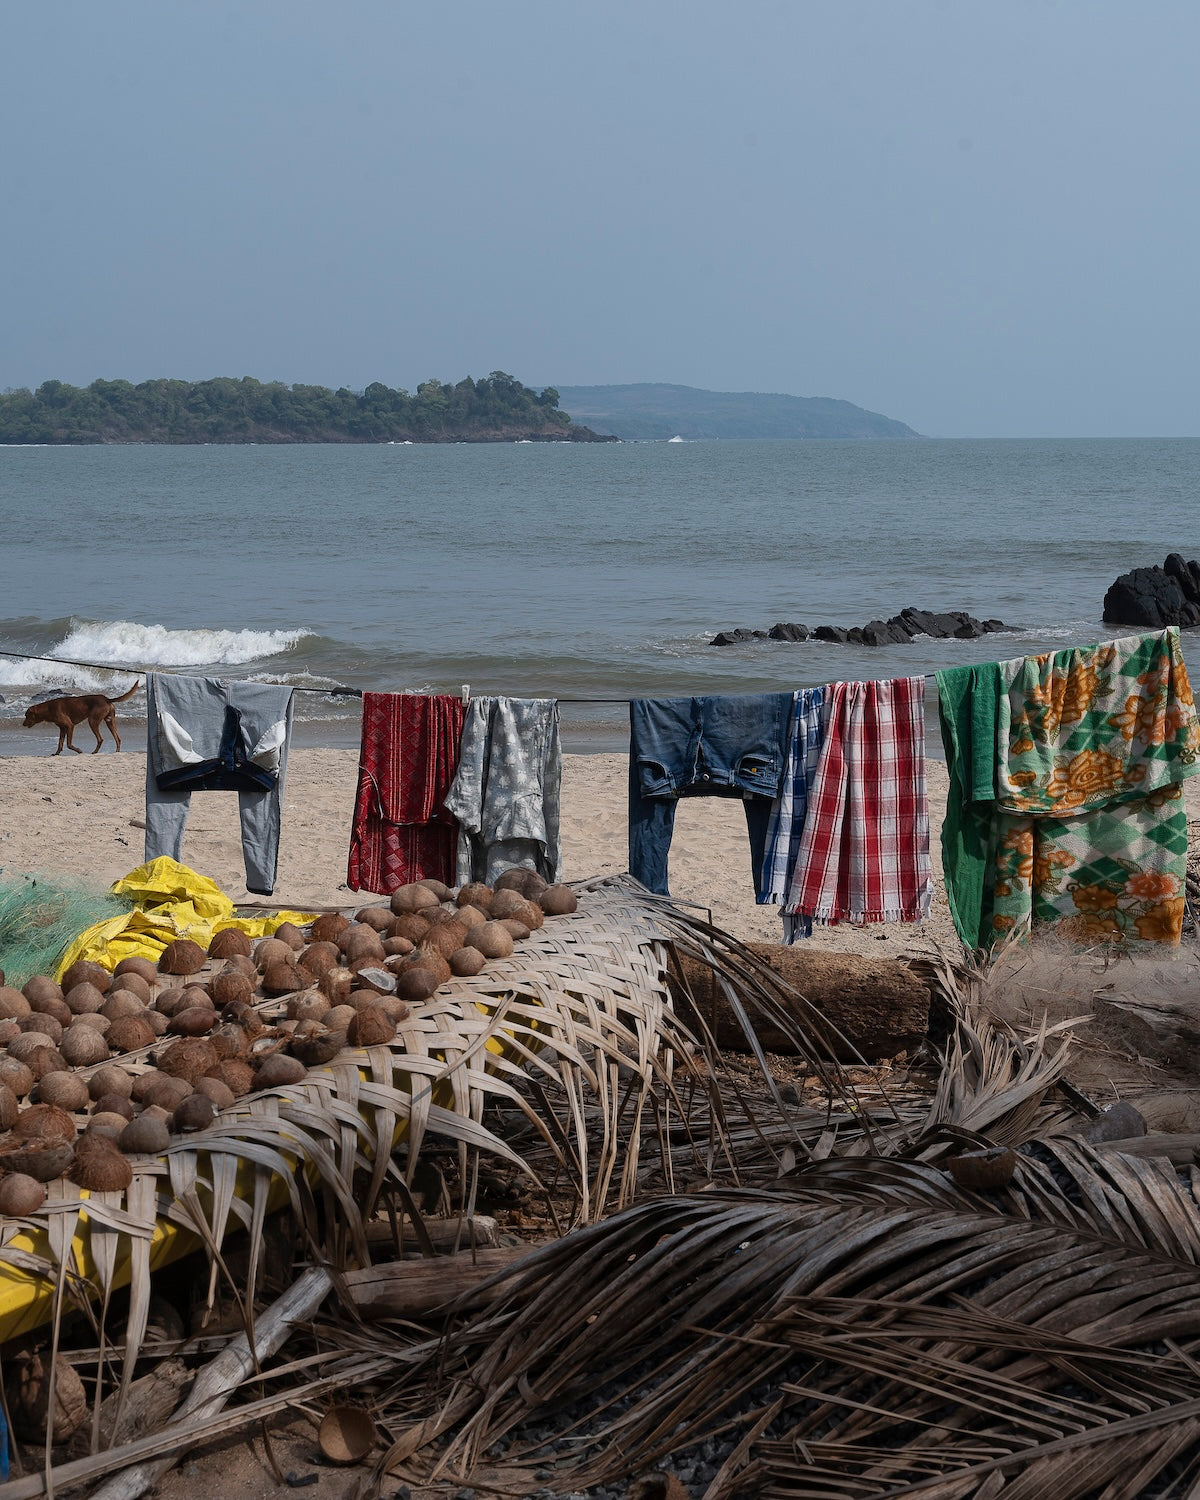 Drying Coconuts and Clothes, Patnem by Karan Khosla